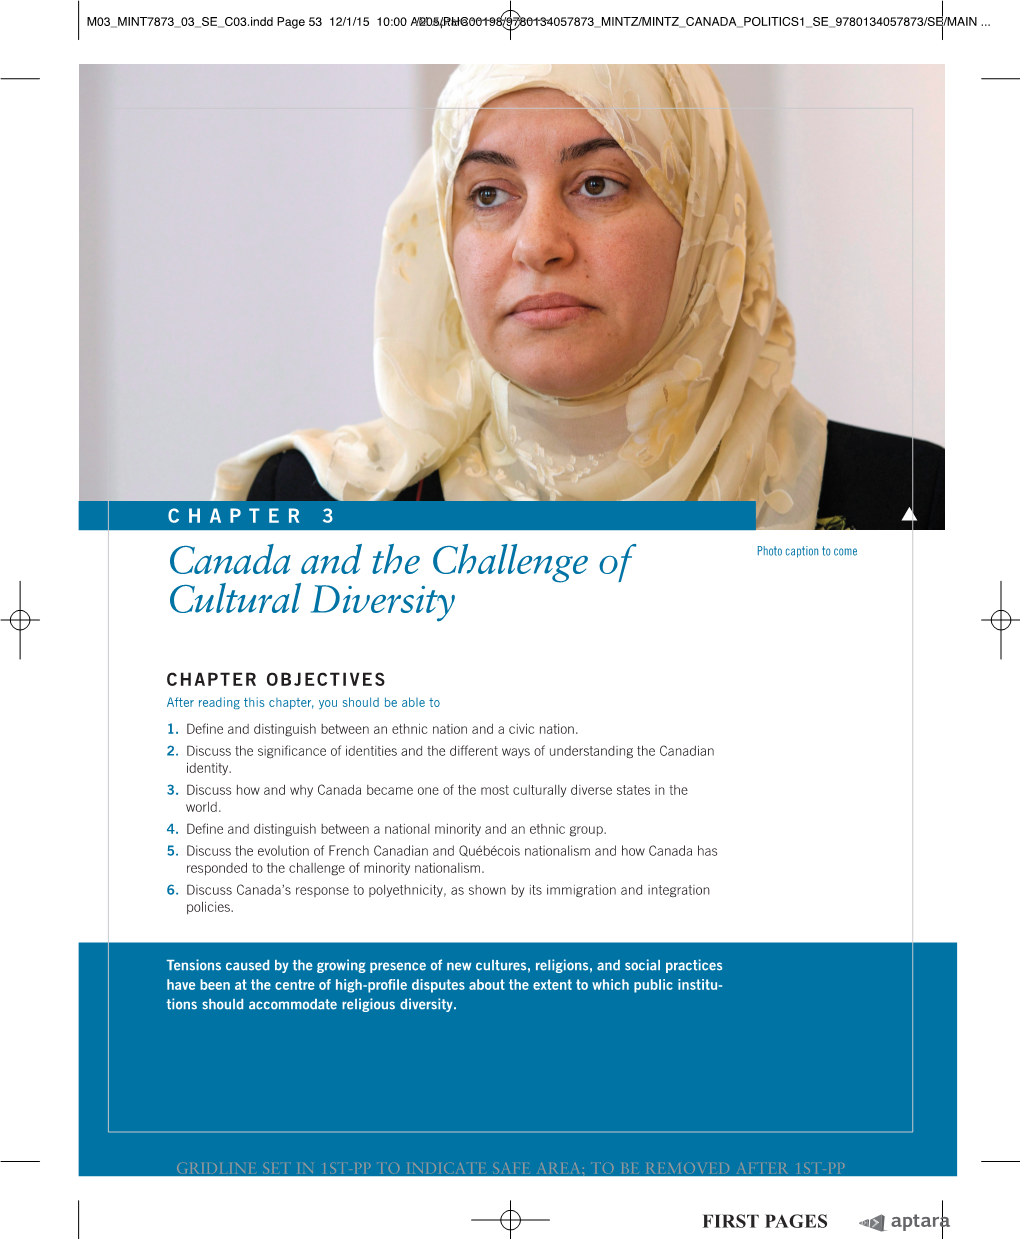 Canada and the Challenge of Cultural Diversity 55